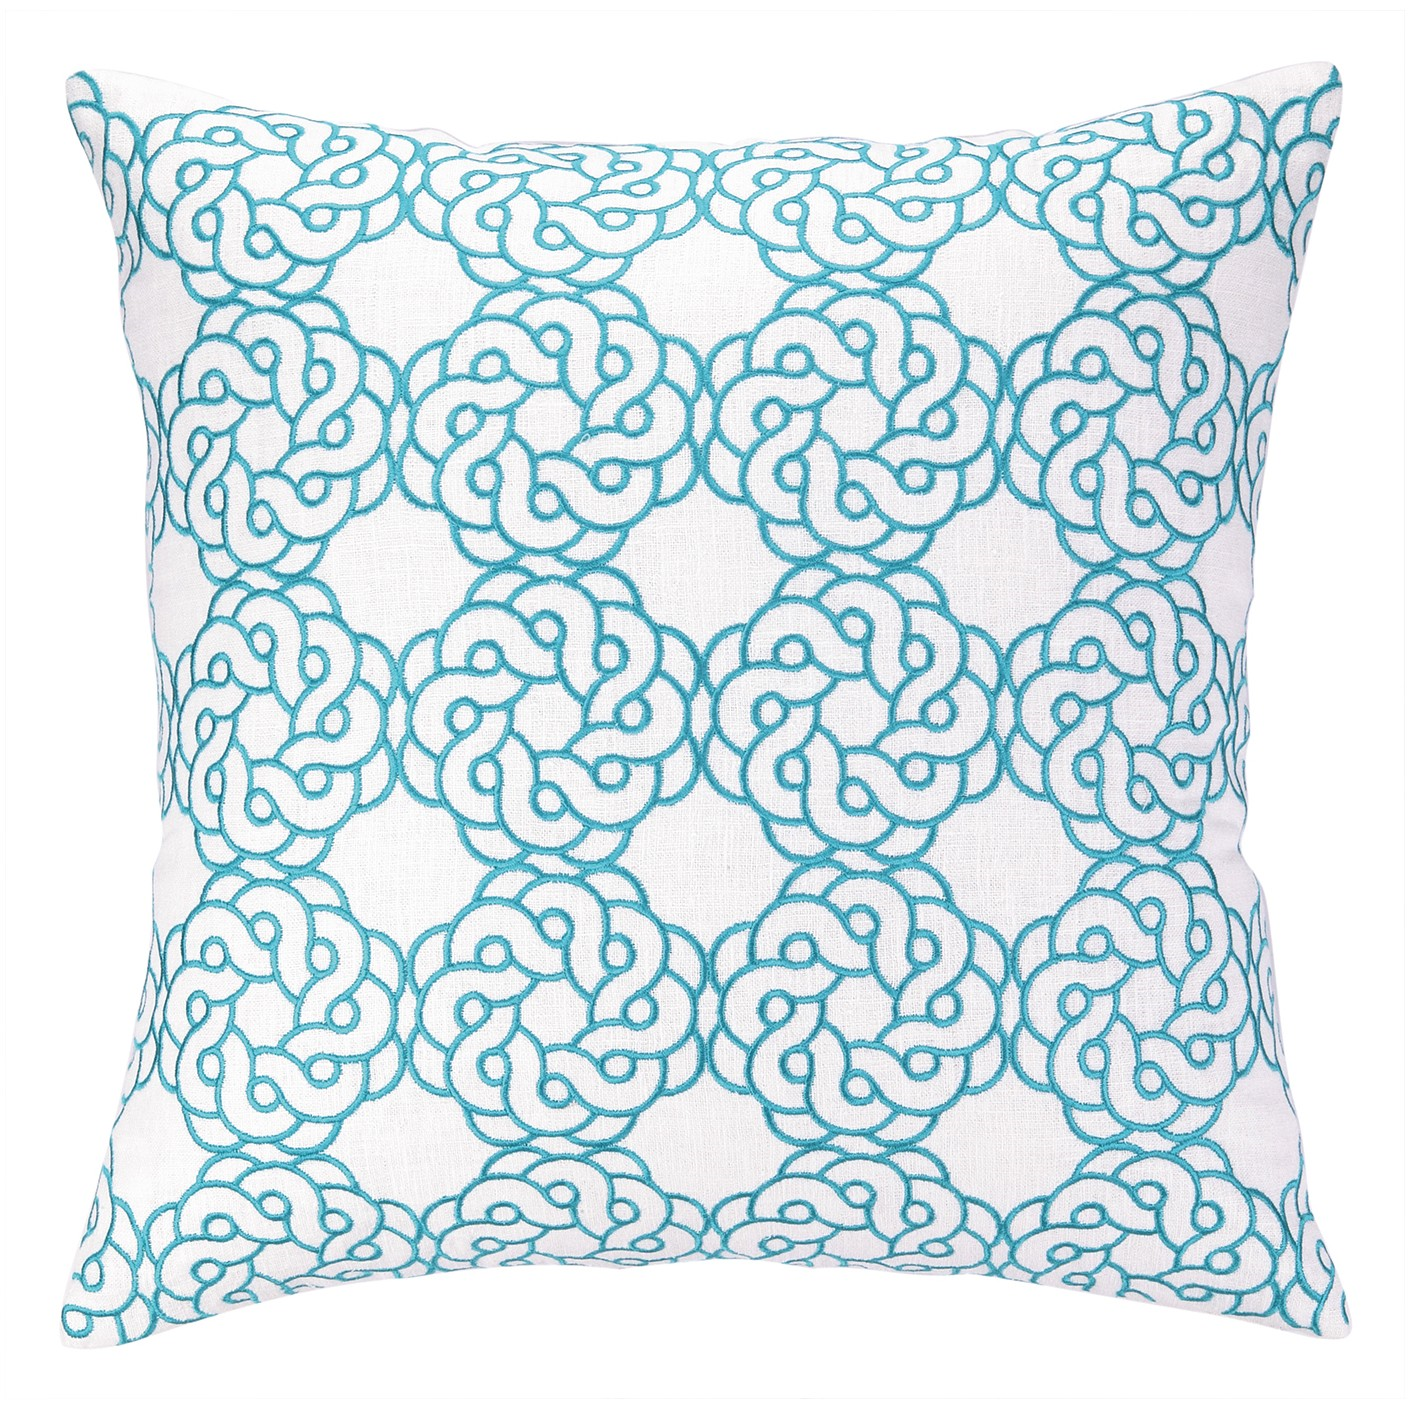 COCOCOZY Maroc Embroidered Linen Pillow in turquoise blue